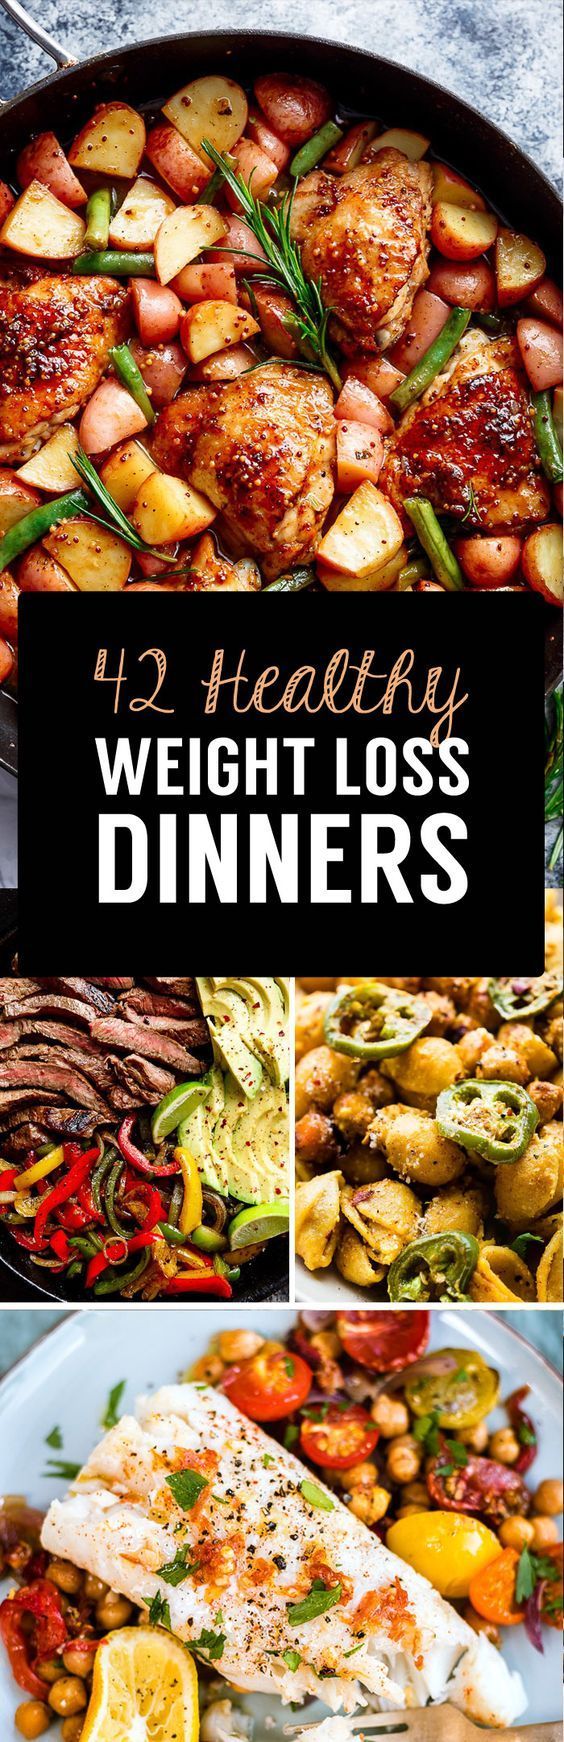 Delicious meals make losing weight fast and simple. If you enjoy the food you are sitting down to, it makes sticking to a healthy,